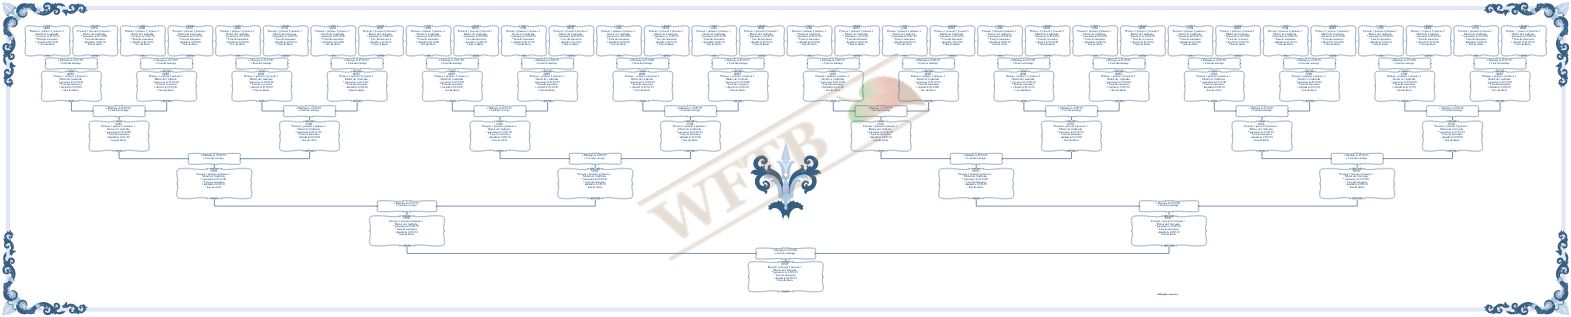 classic-family-tree-6-generations-template-1